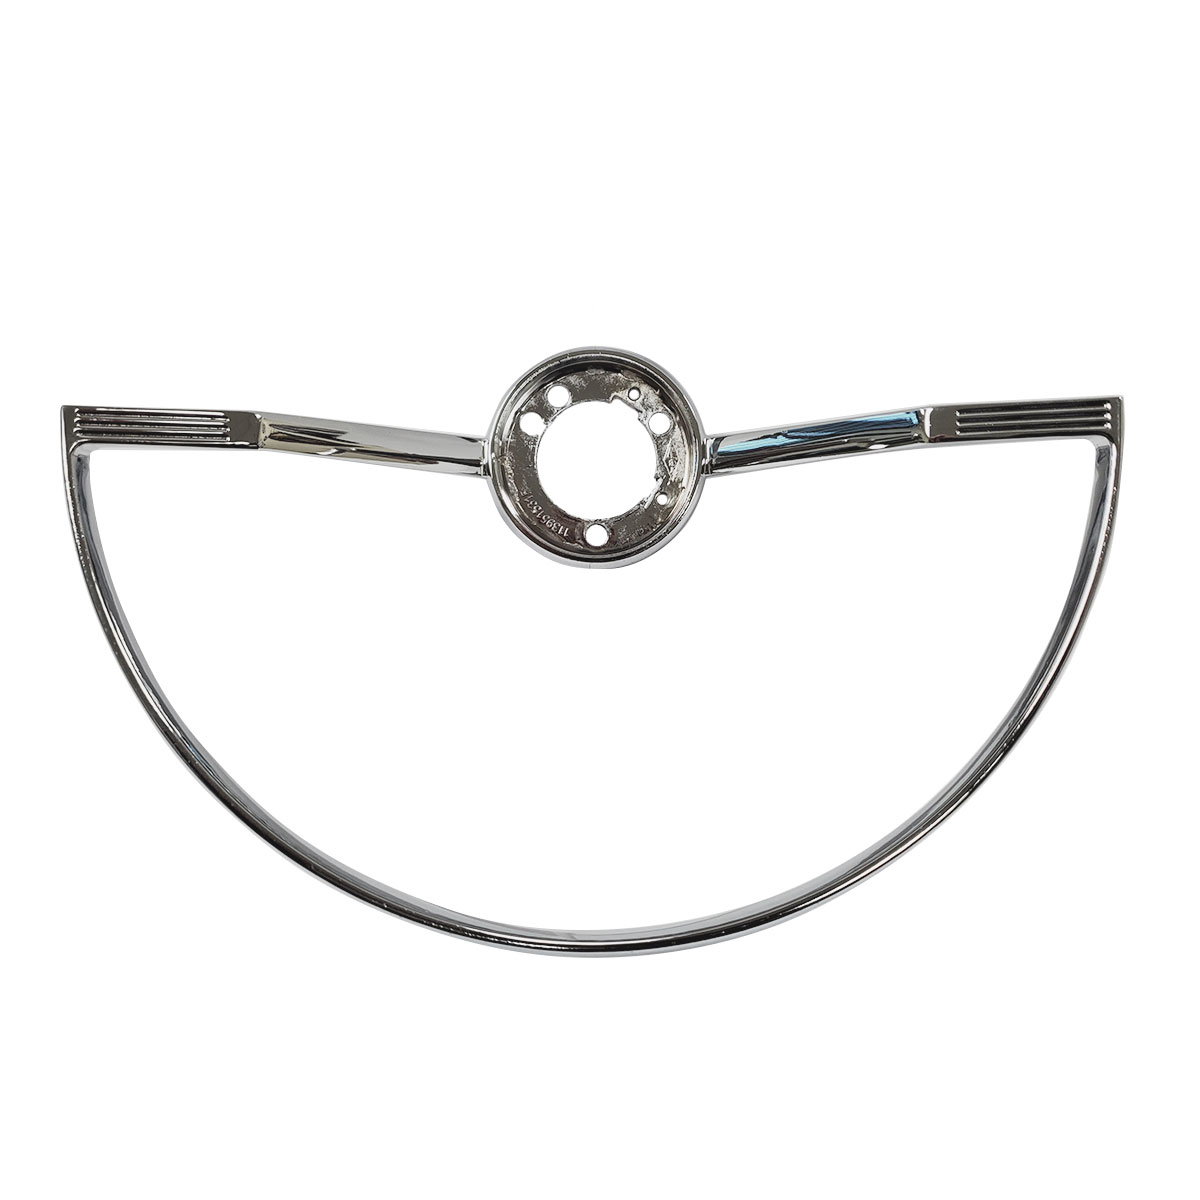 Replacement VW Horn Ring - Chrome - for Stock Style Steering Wheels